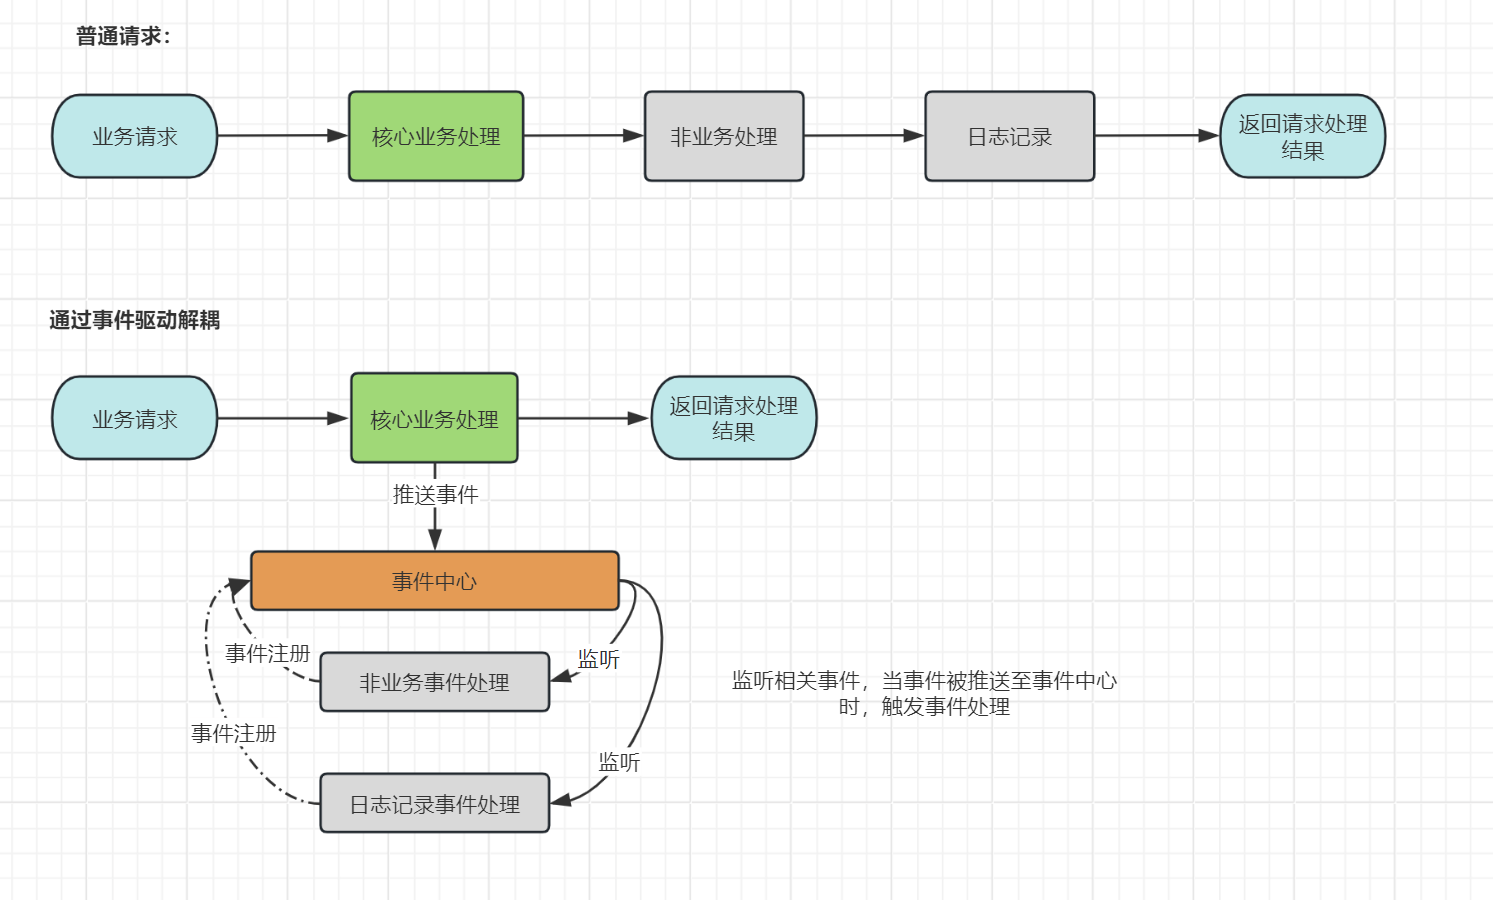 SpringBoot Event，事件<span style='color:red;'>驱动</span>轻松实现业务解<span style='color:red;'>耦</span>